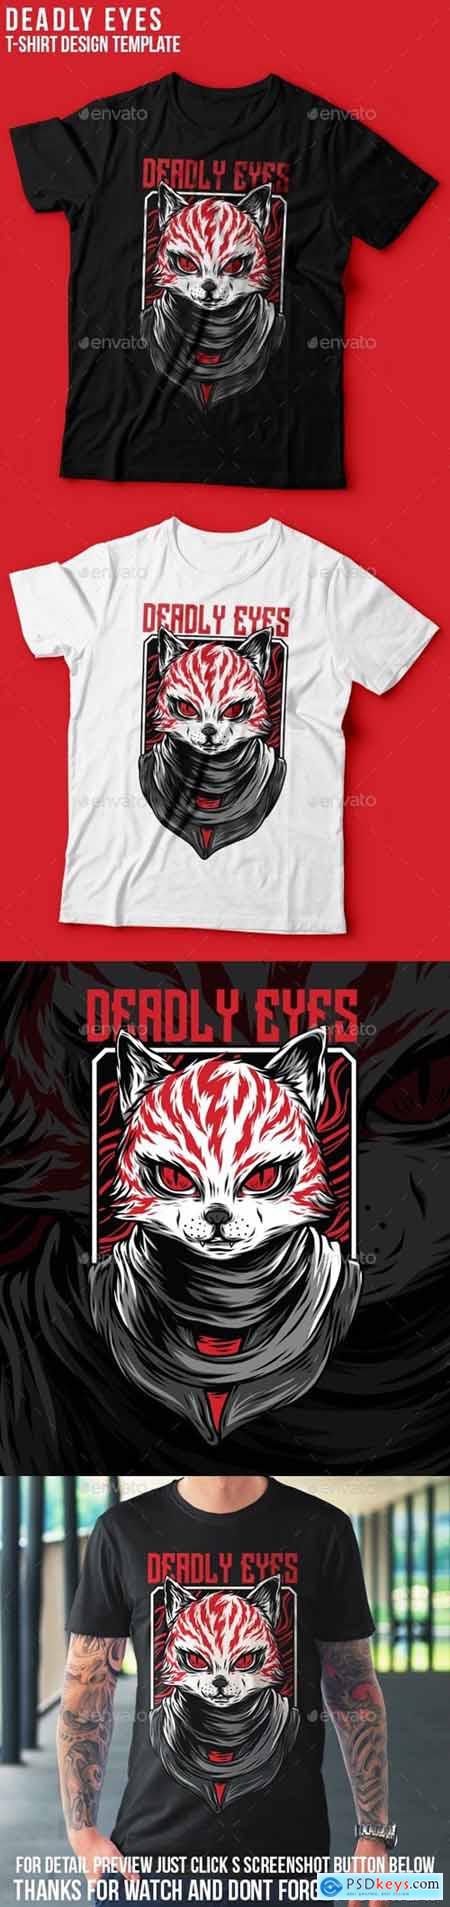 Graphicriver Deadly Eyes T-Shirt Design